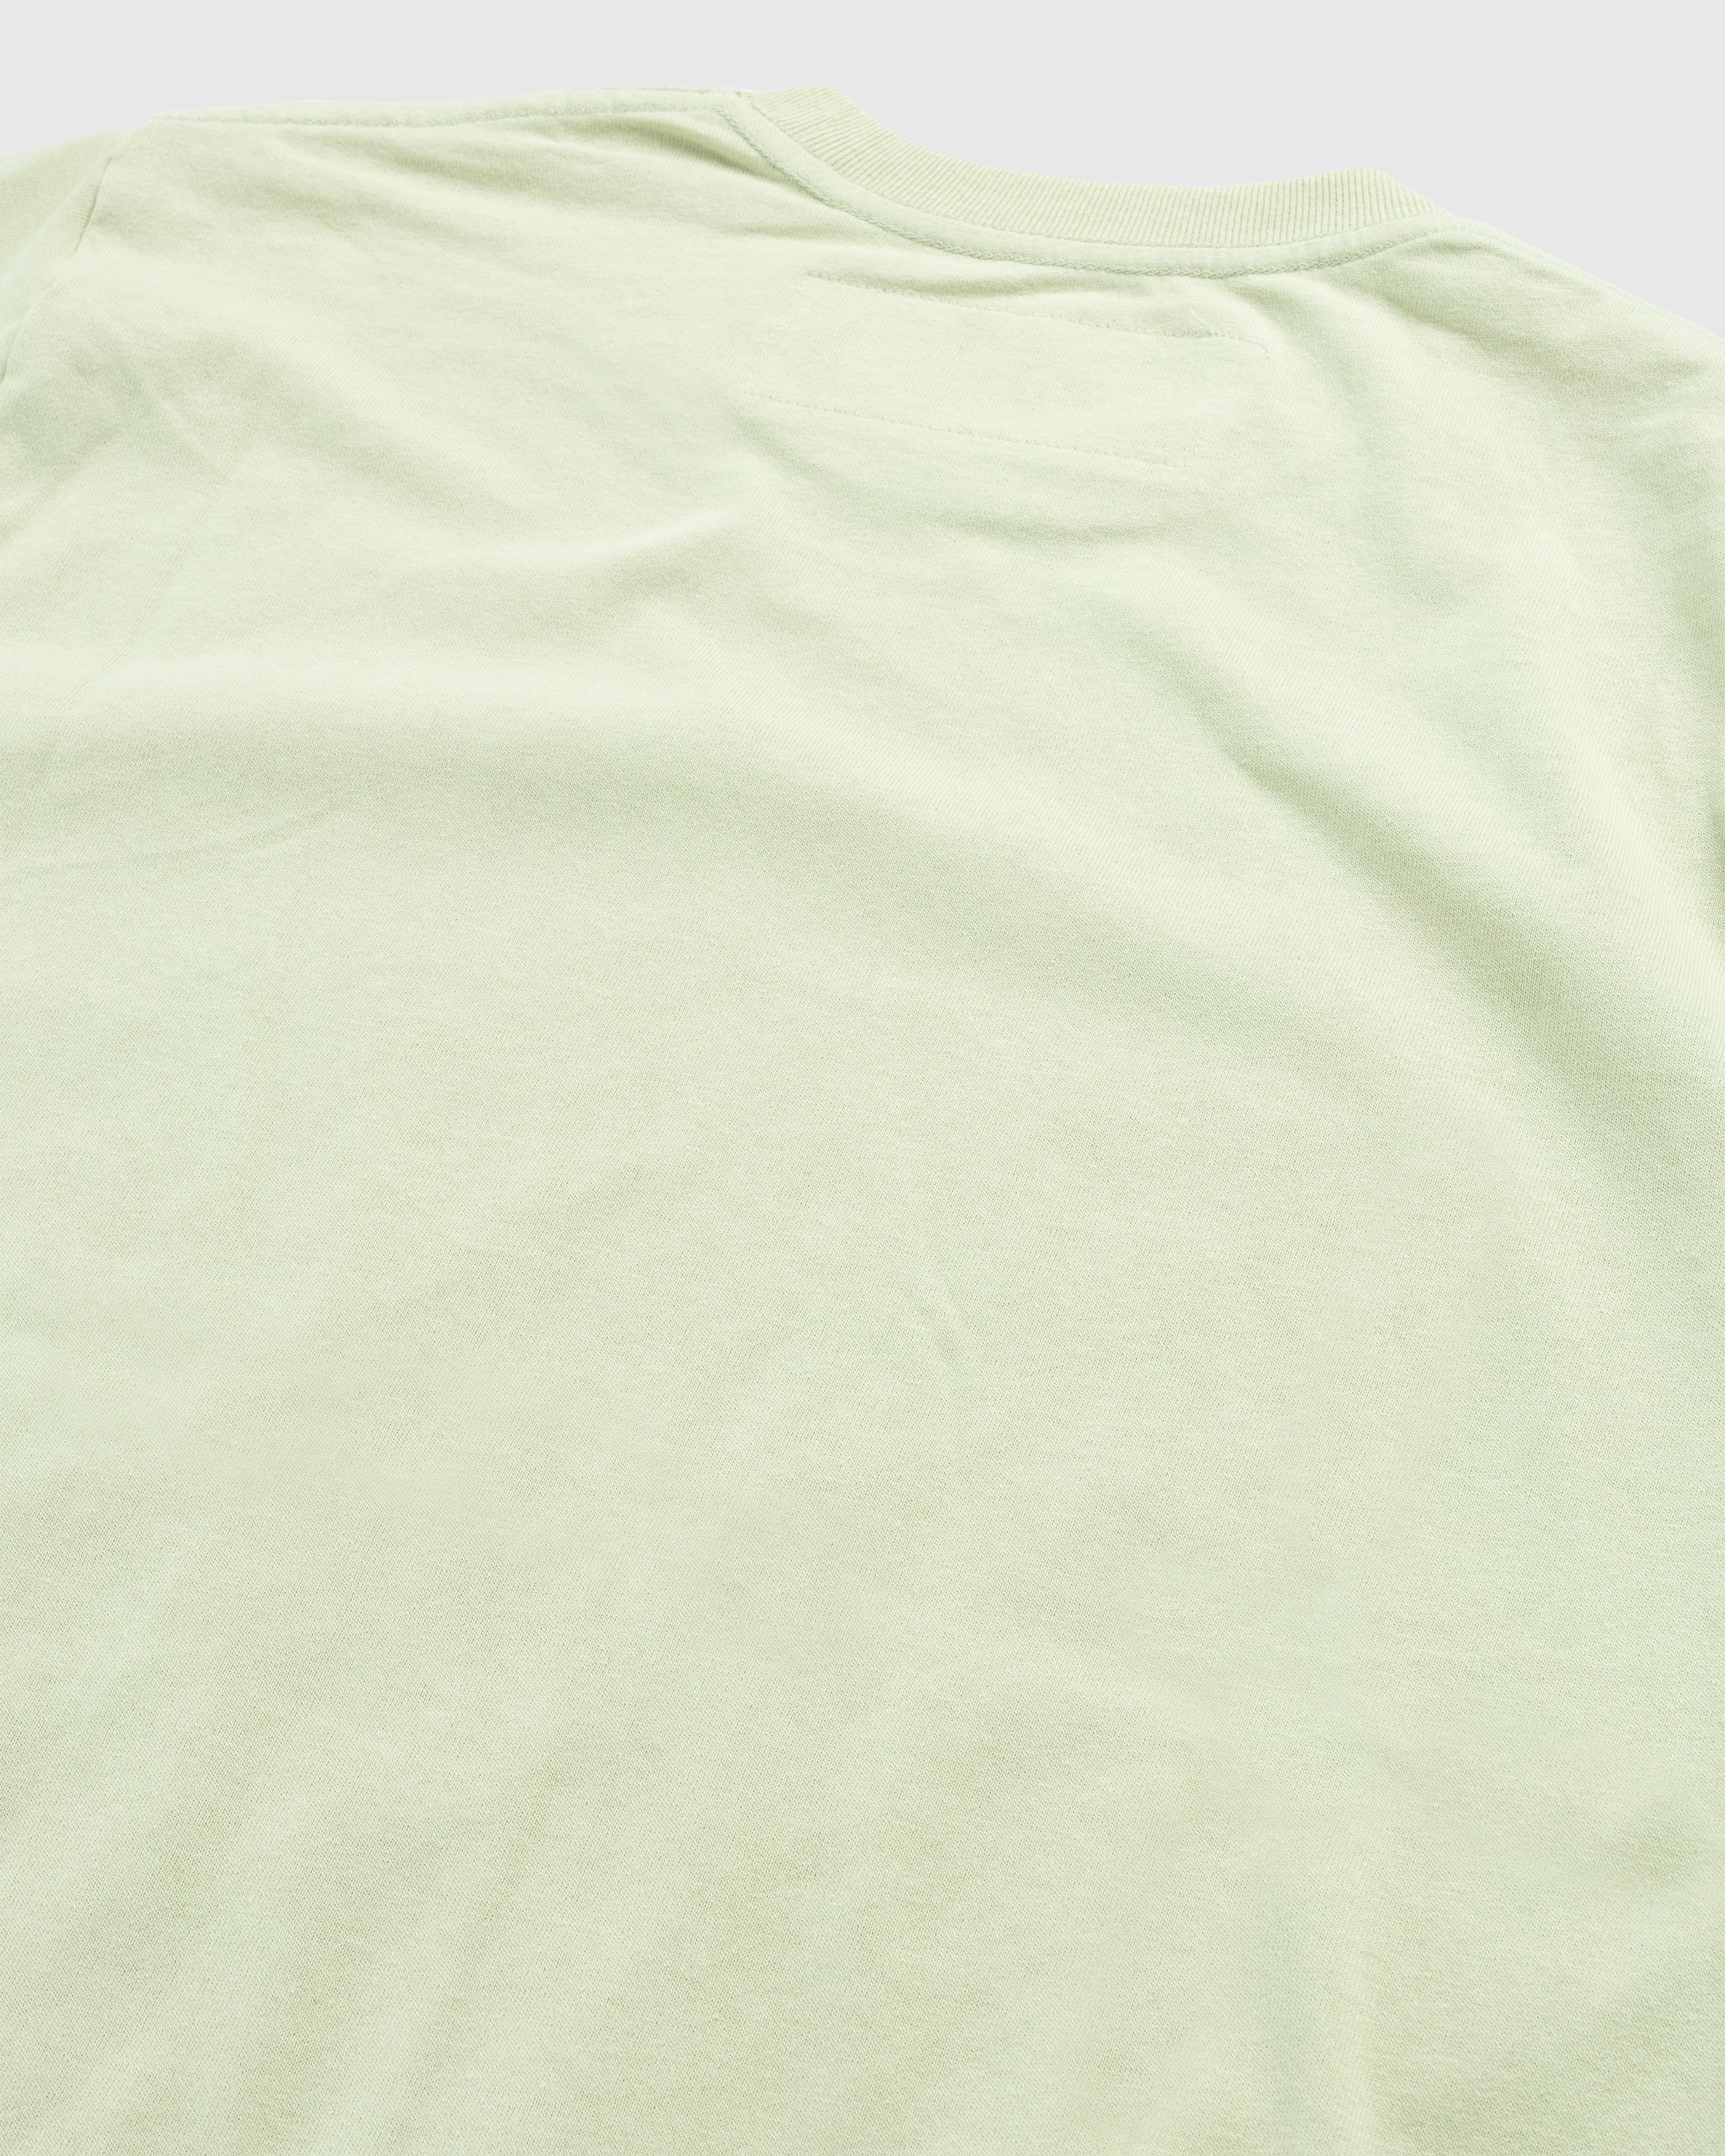 Gentle Fullness - Recycled Cotton Bugs Tee Green - Clothing - Green - Image 6